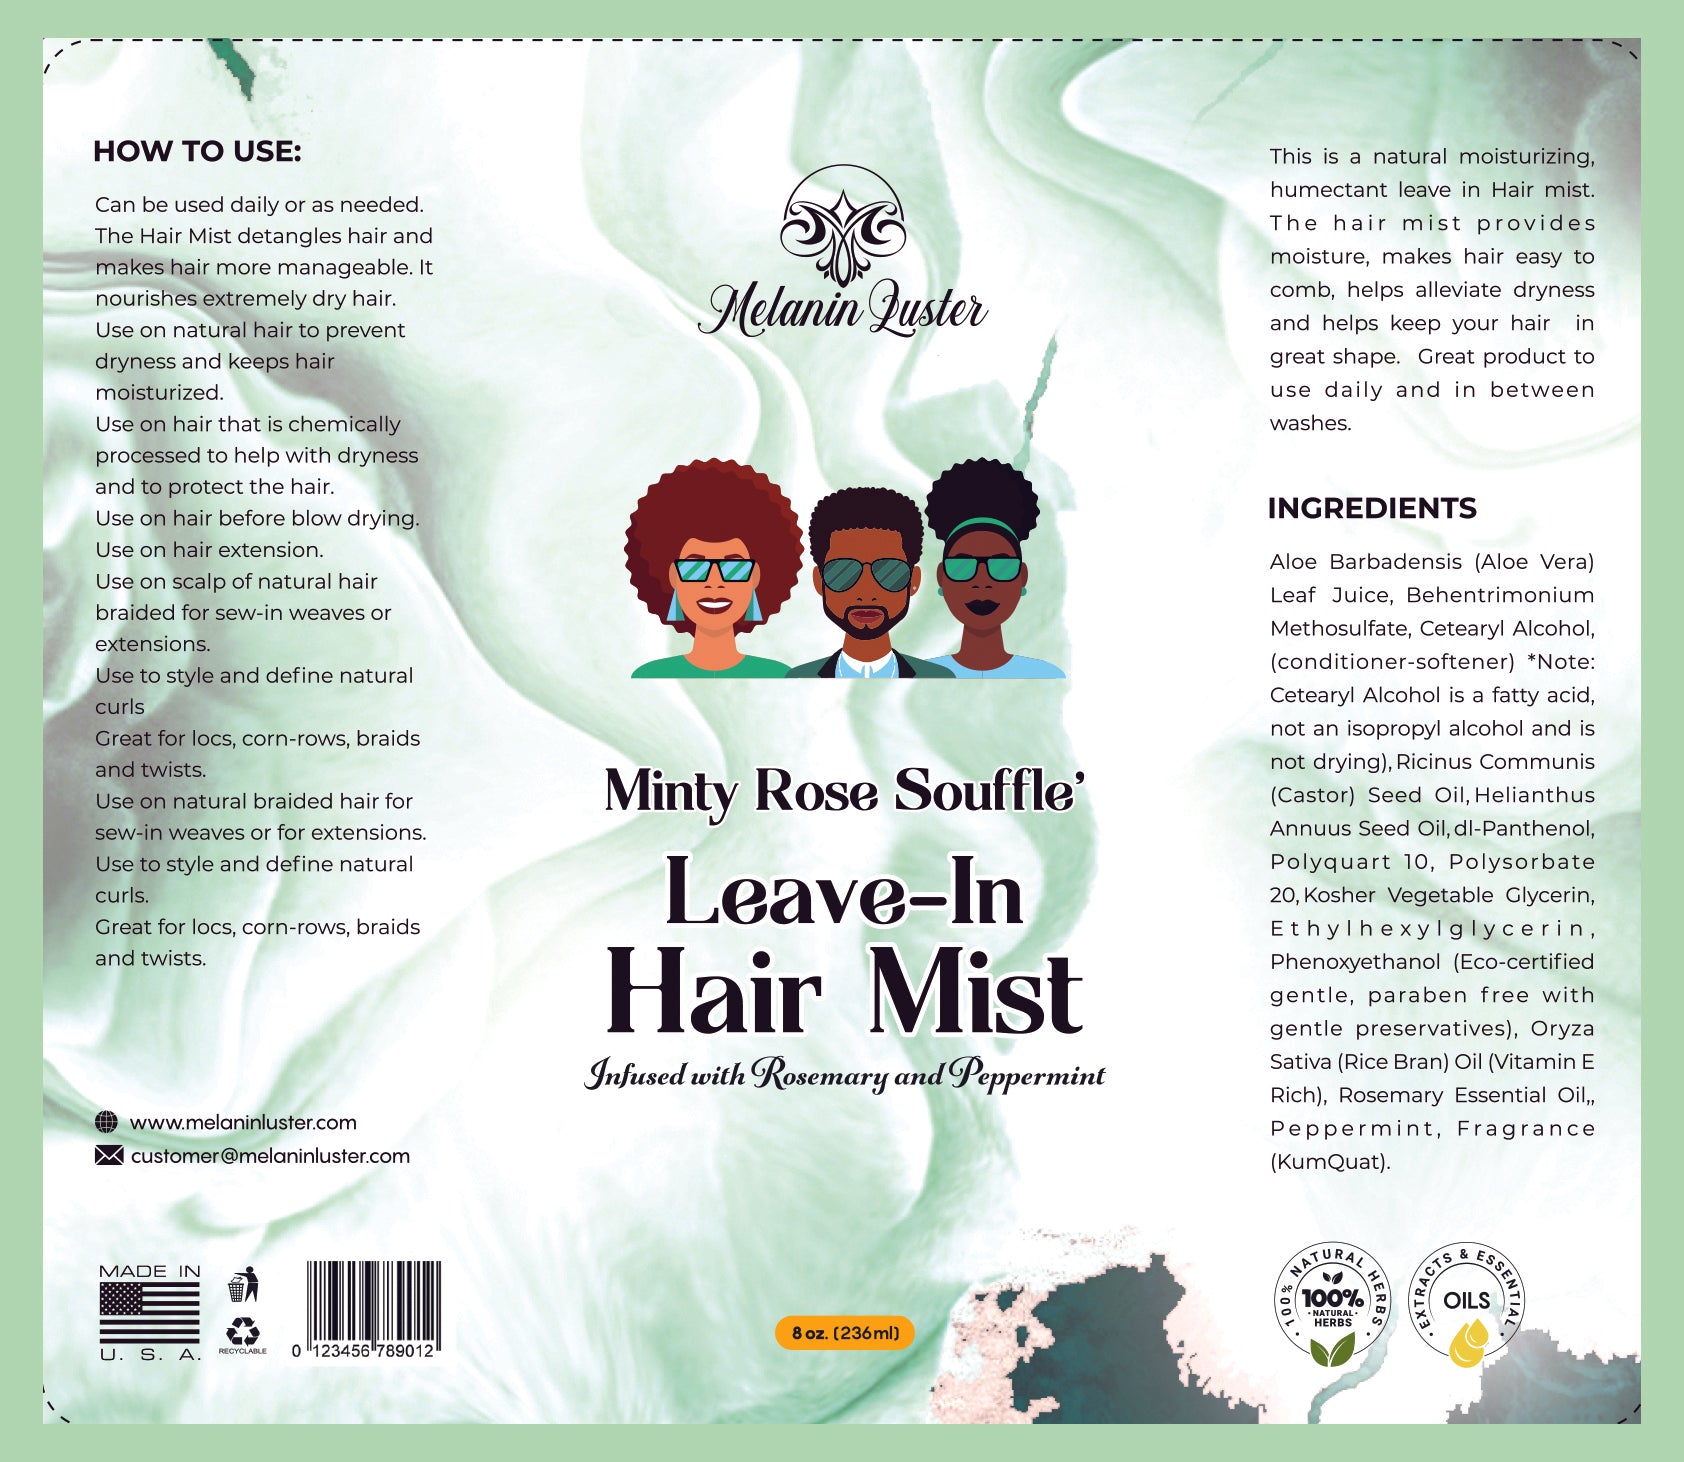 Minty Rose Souffle' Leave-In Hair Mist